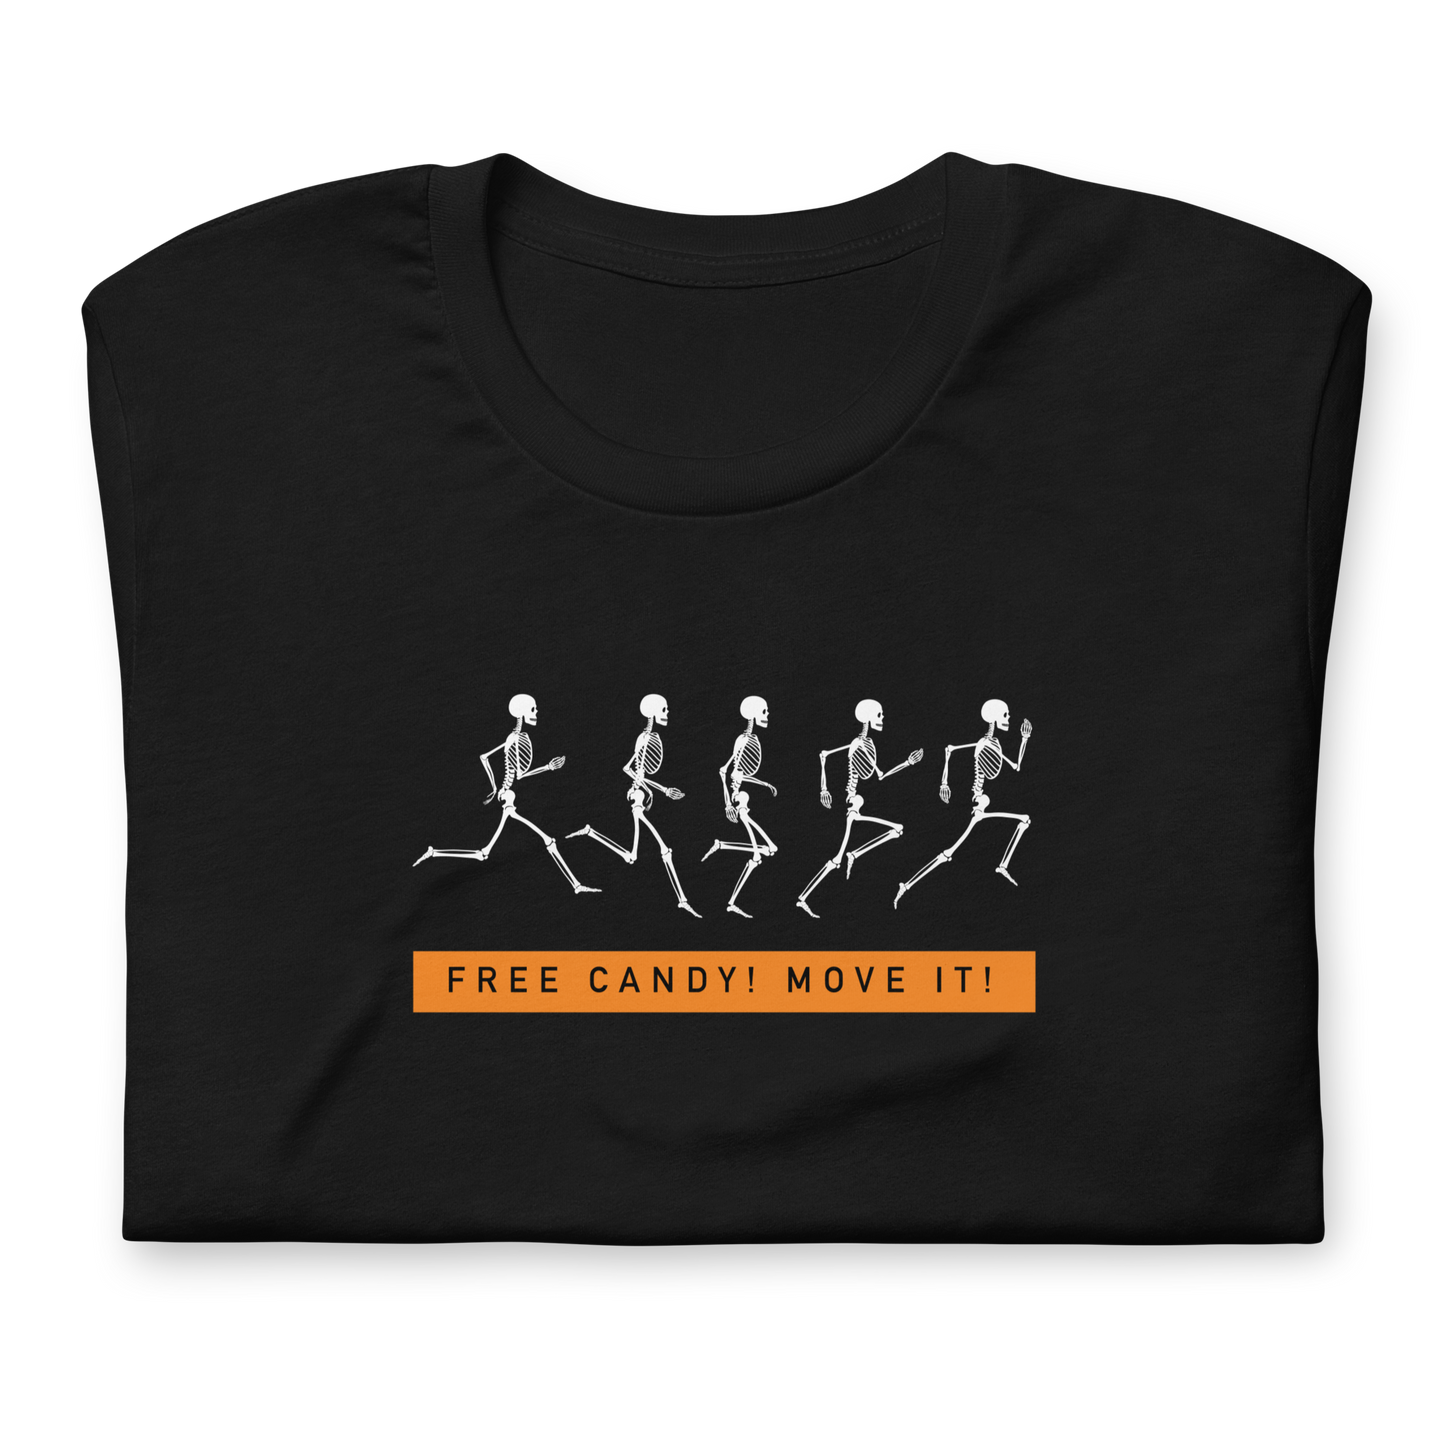 Unisex - Halloween Free Candy! Move it! - Funny T-Shirt